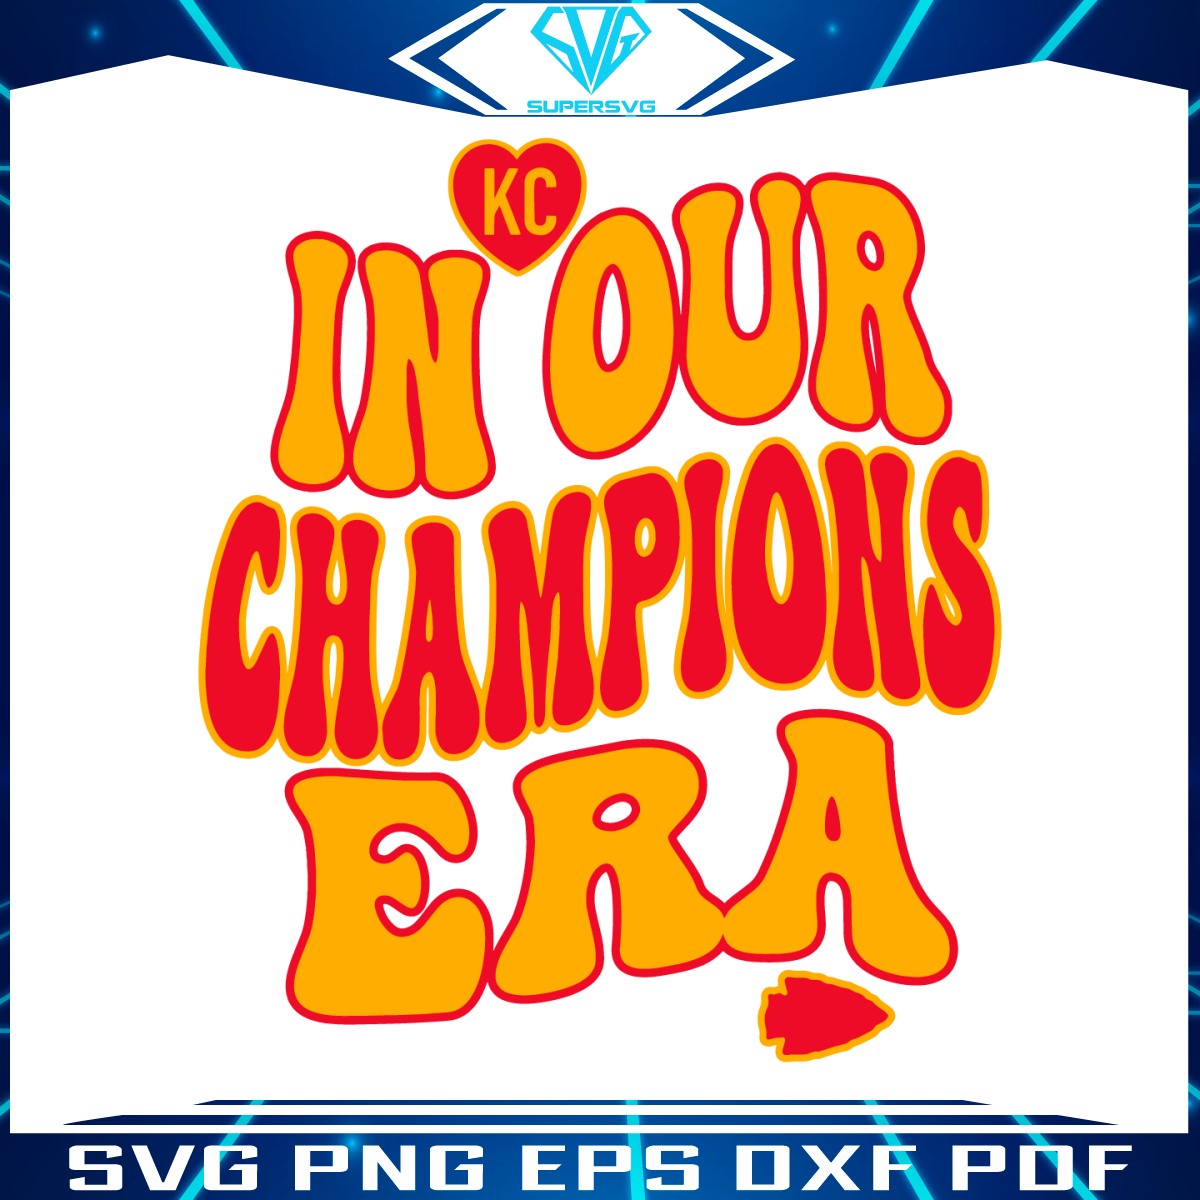 kc-football-in-our-champions-era-svg